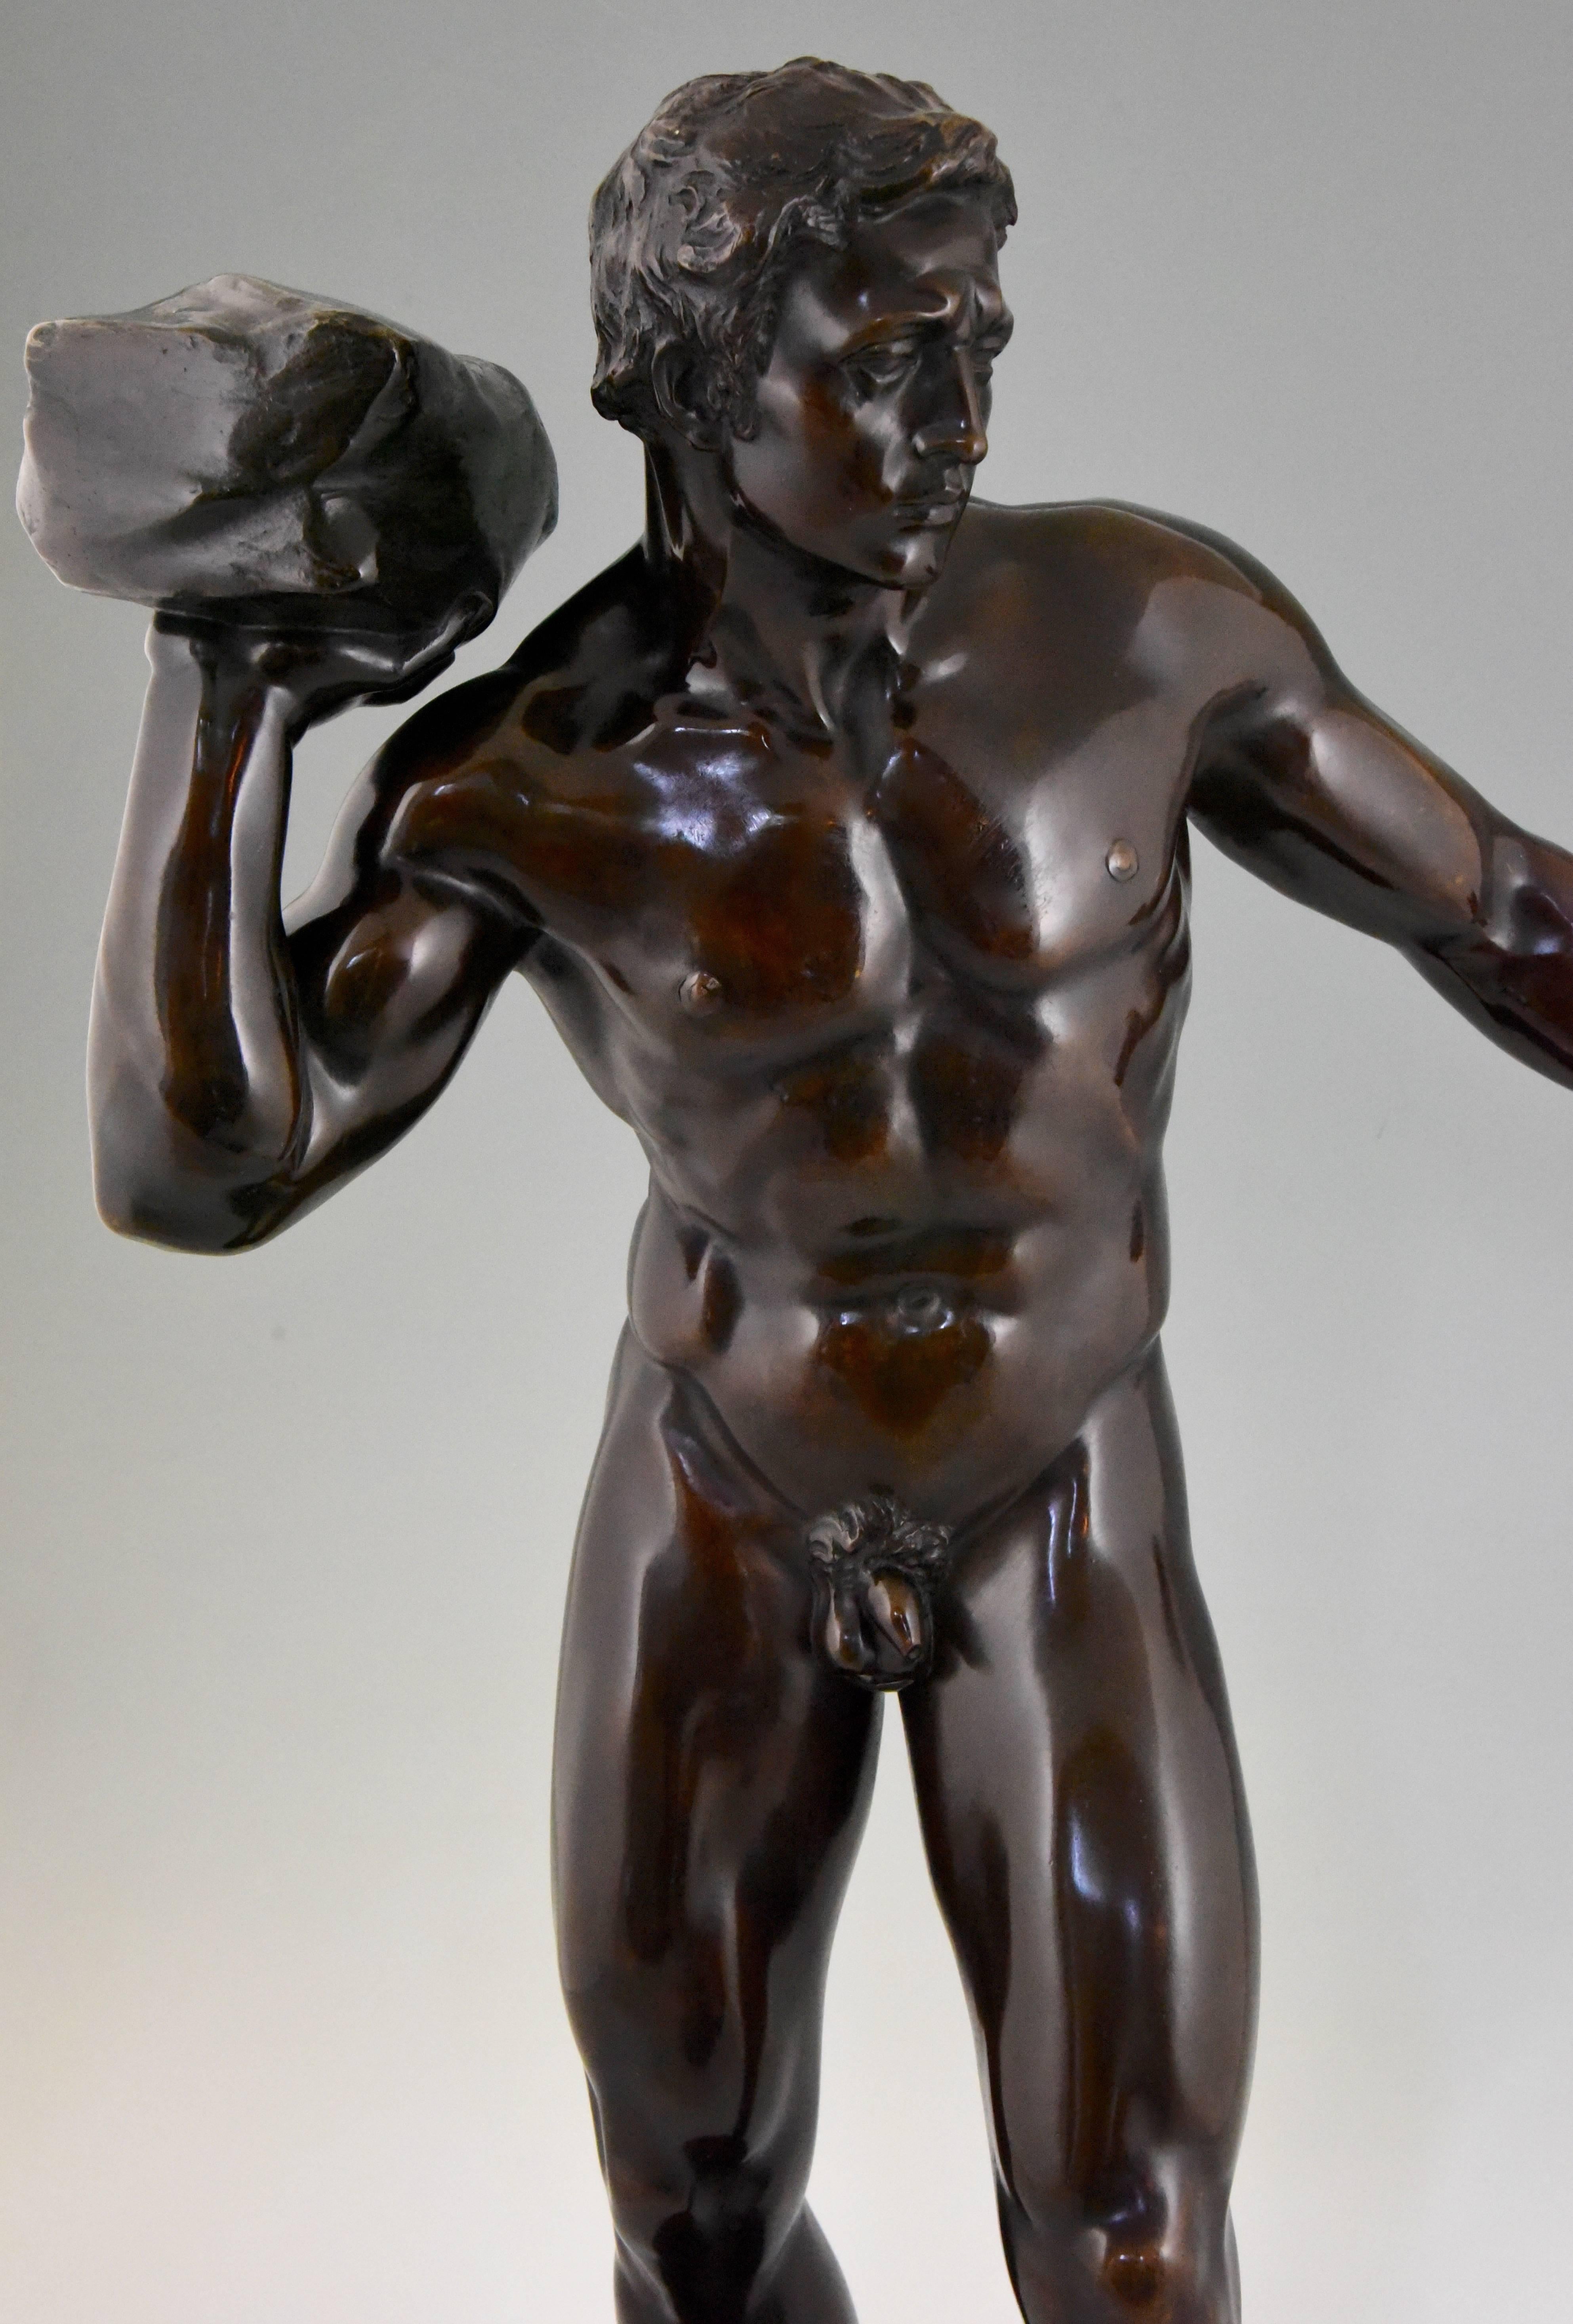 20th Century Antique Sculpture of a Male Nude Athlete Georg Kemper H. 34 inch Germany, 1900